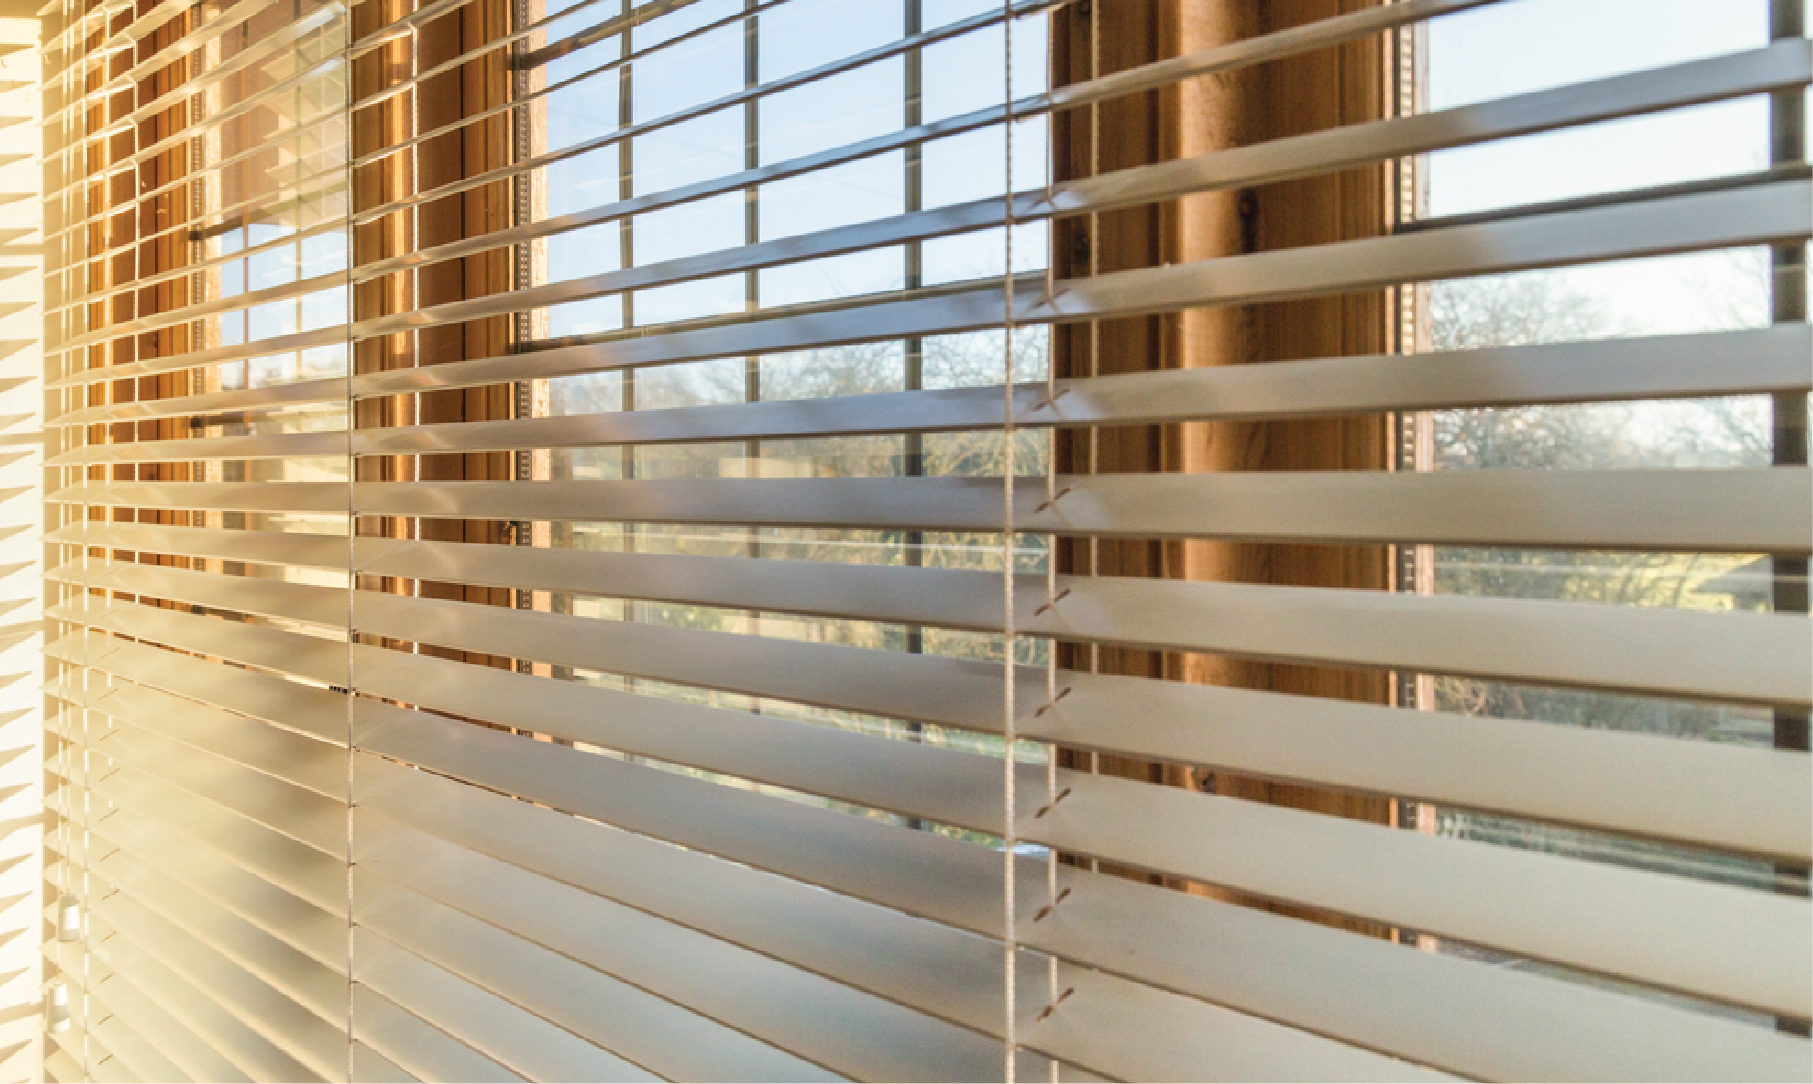 Window Blinds Store In Pune, Customized Window Blinds, Blinds Shop, Supplier